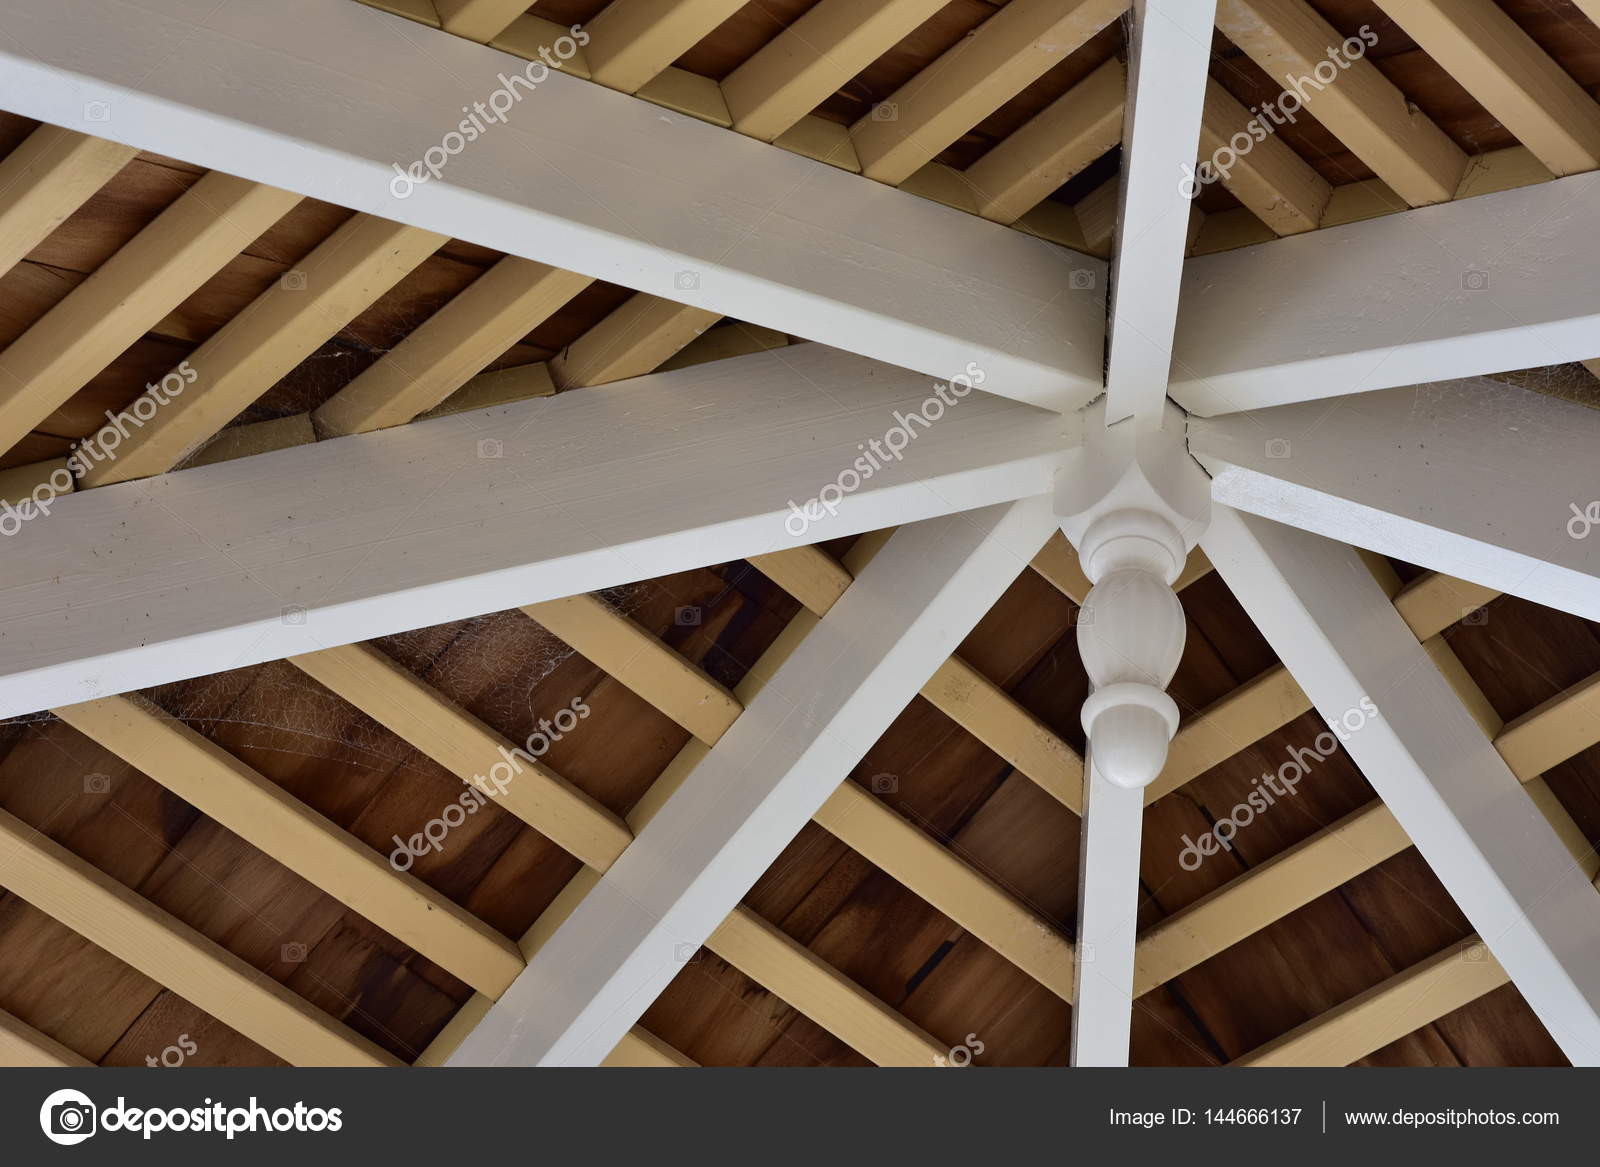 Rustic Wooden Ceiling Stock Photo C Spiderment 144666137